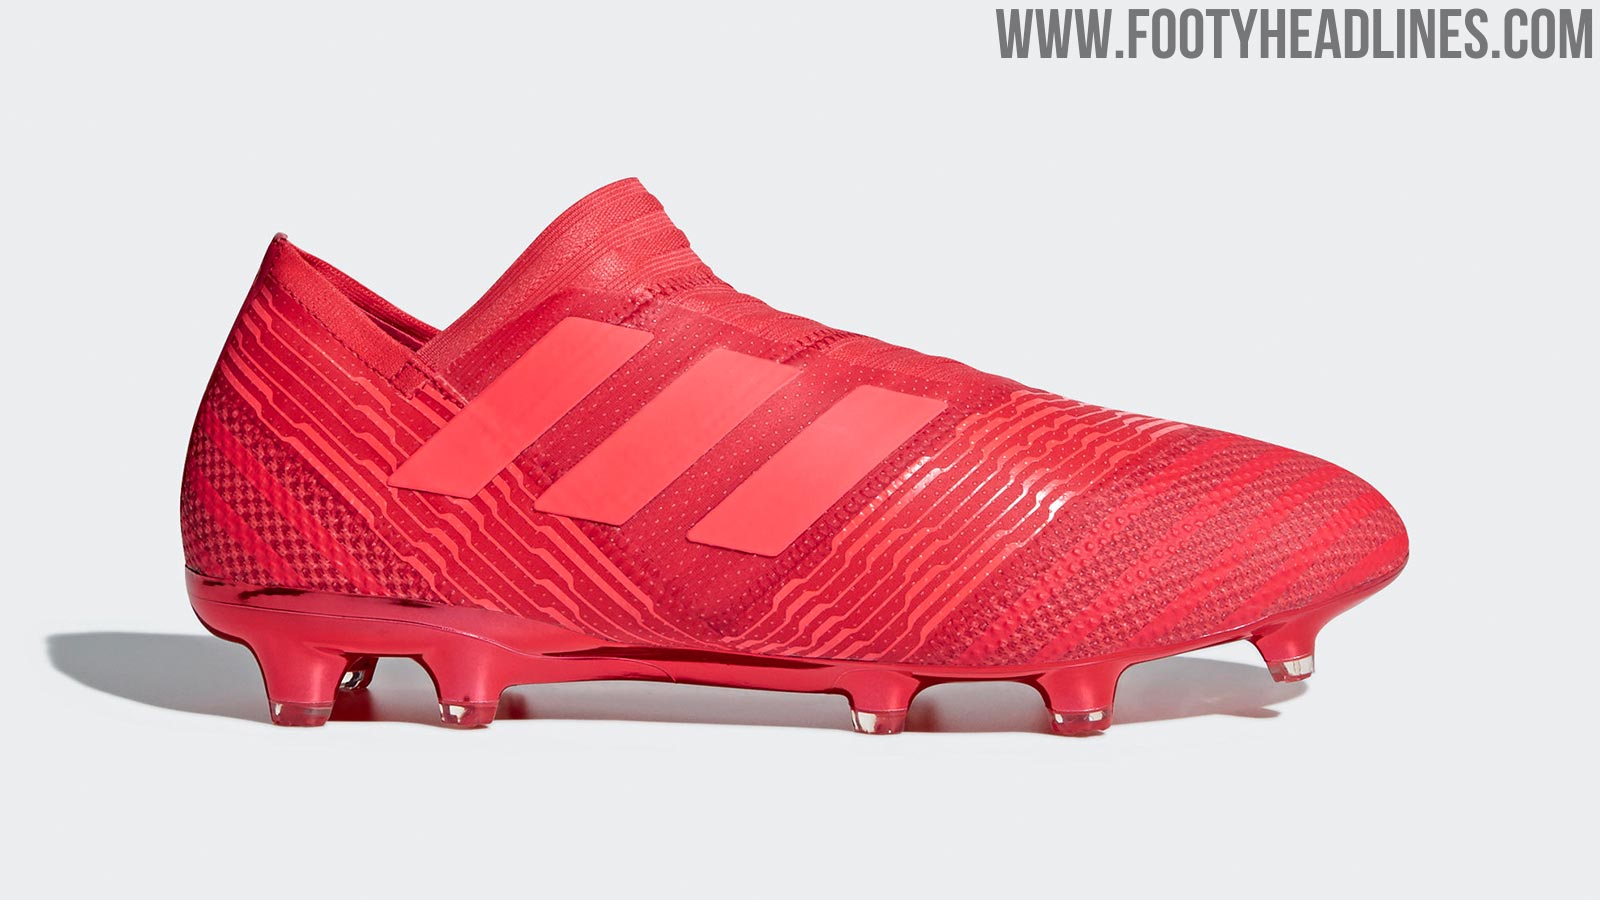 Cold Blooded' Adidas Nemeziz 360Agility Boots Released - Footy Headlines